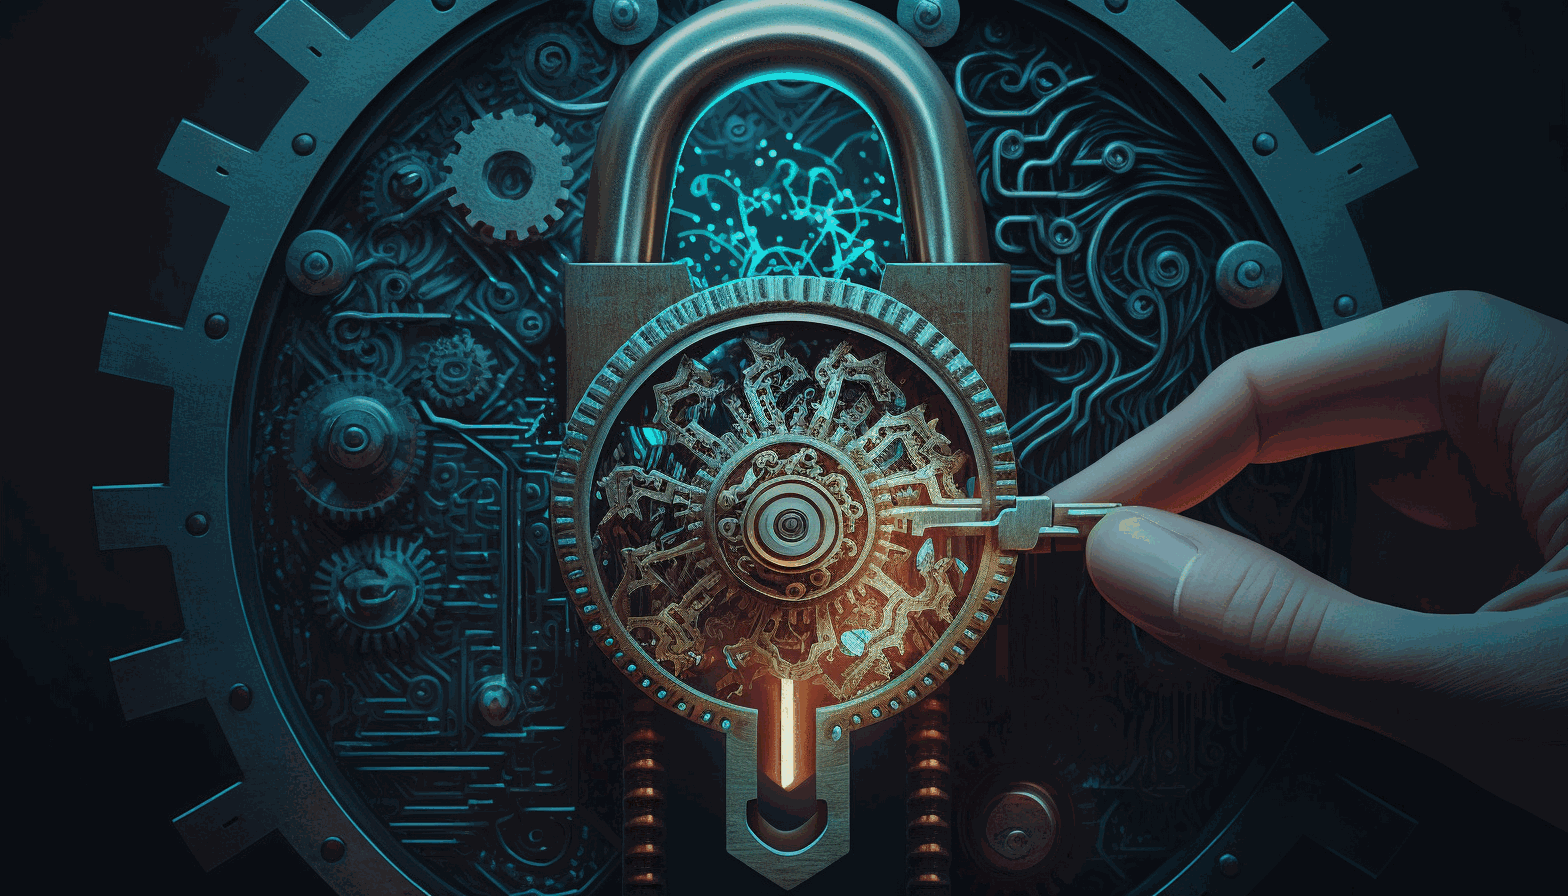 An image of a lock with gears symbolizing the use of AI in cybersecurity, while a human hand is holding a key to illustrate human oversight.